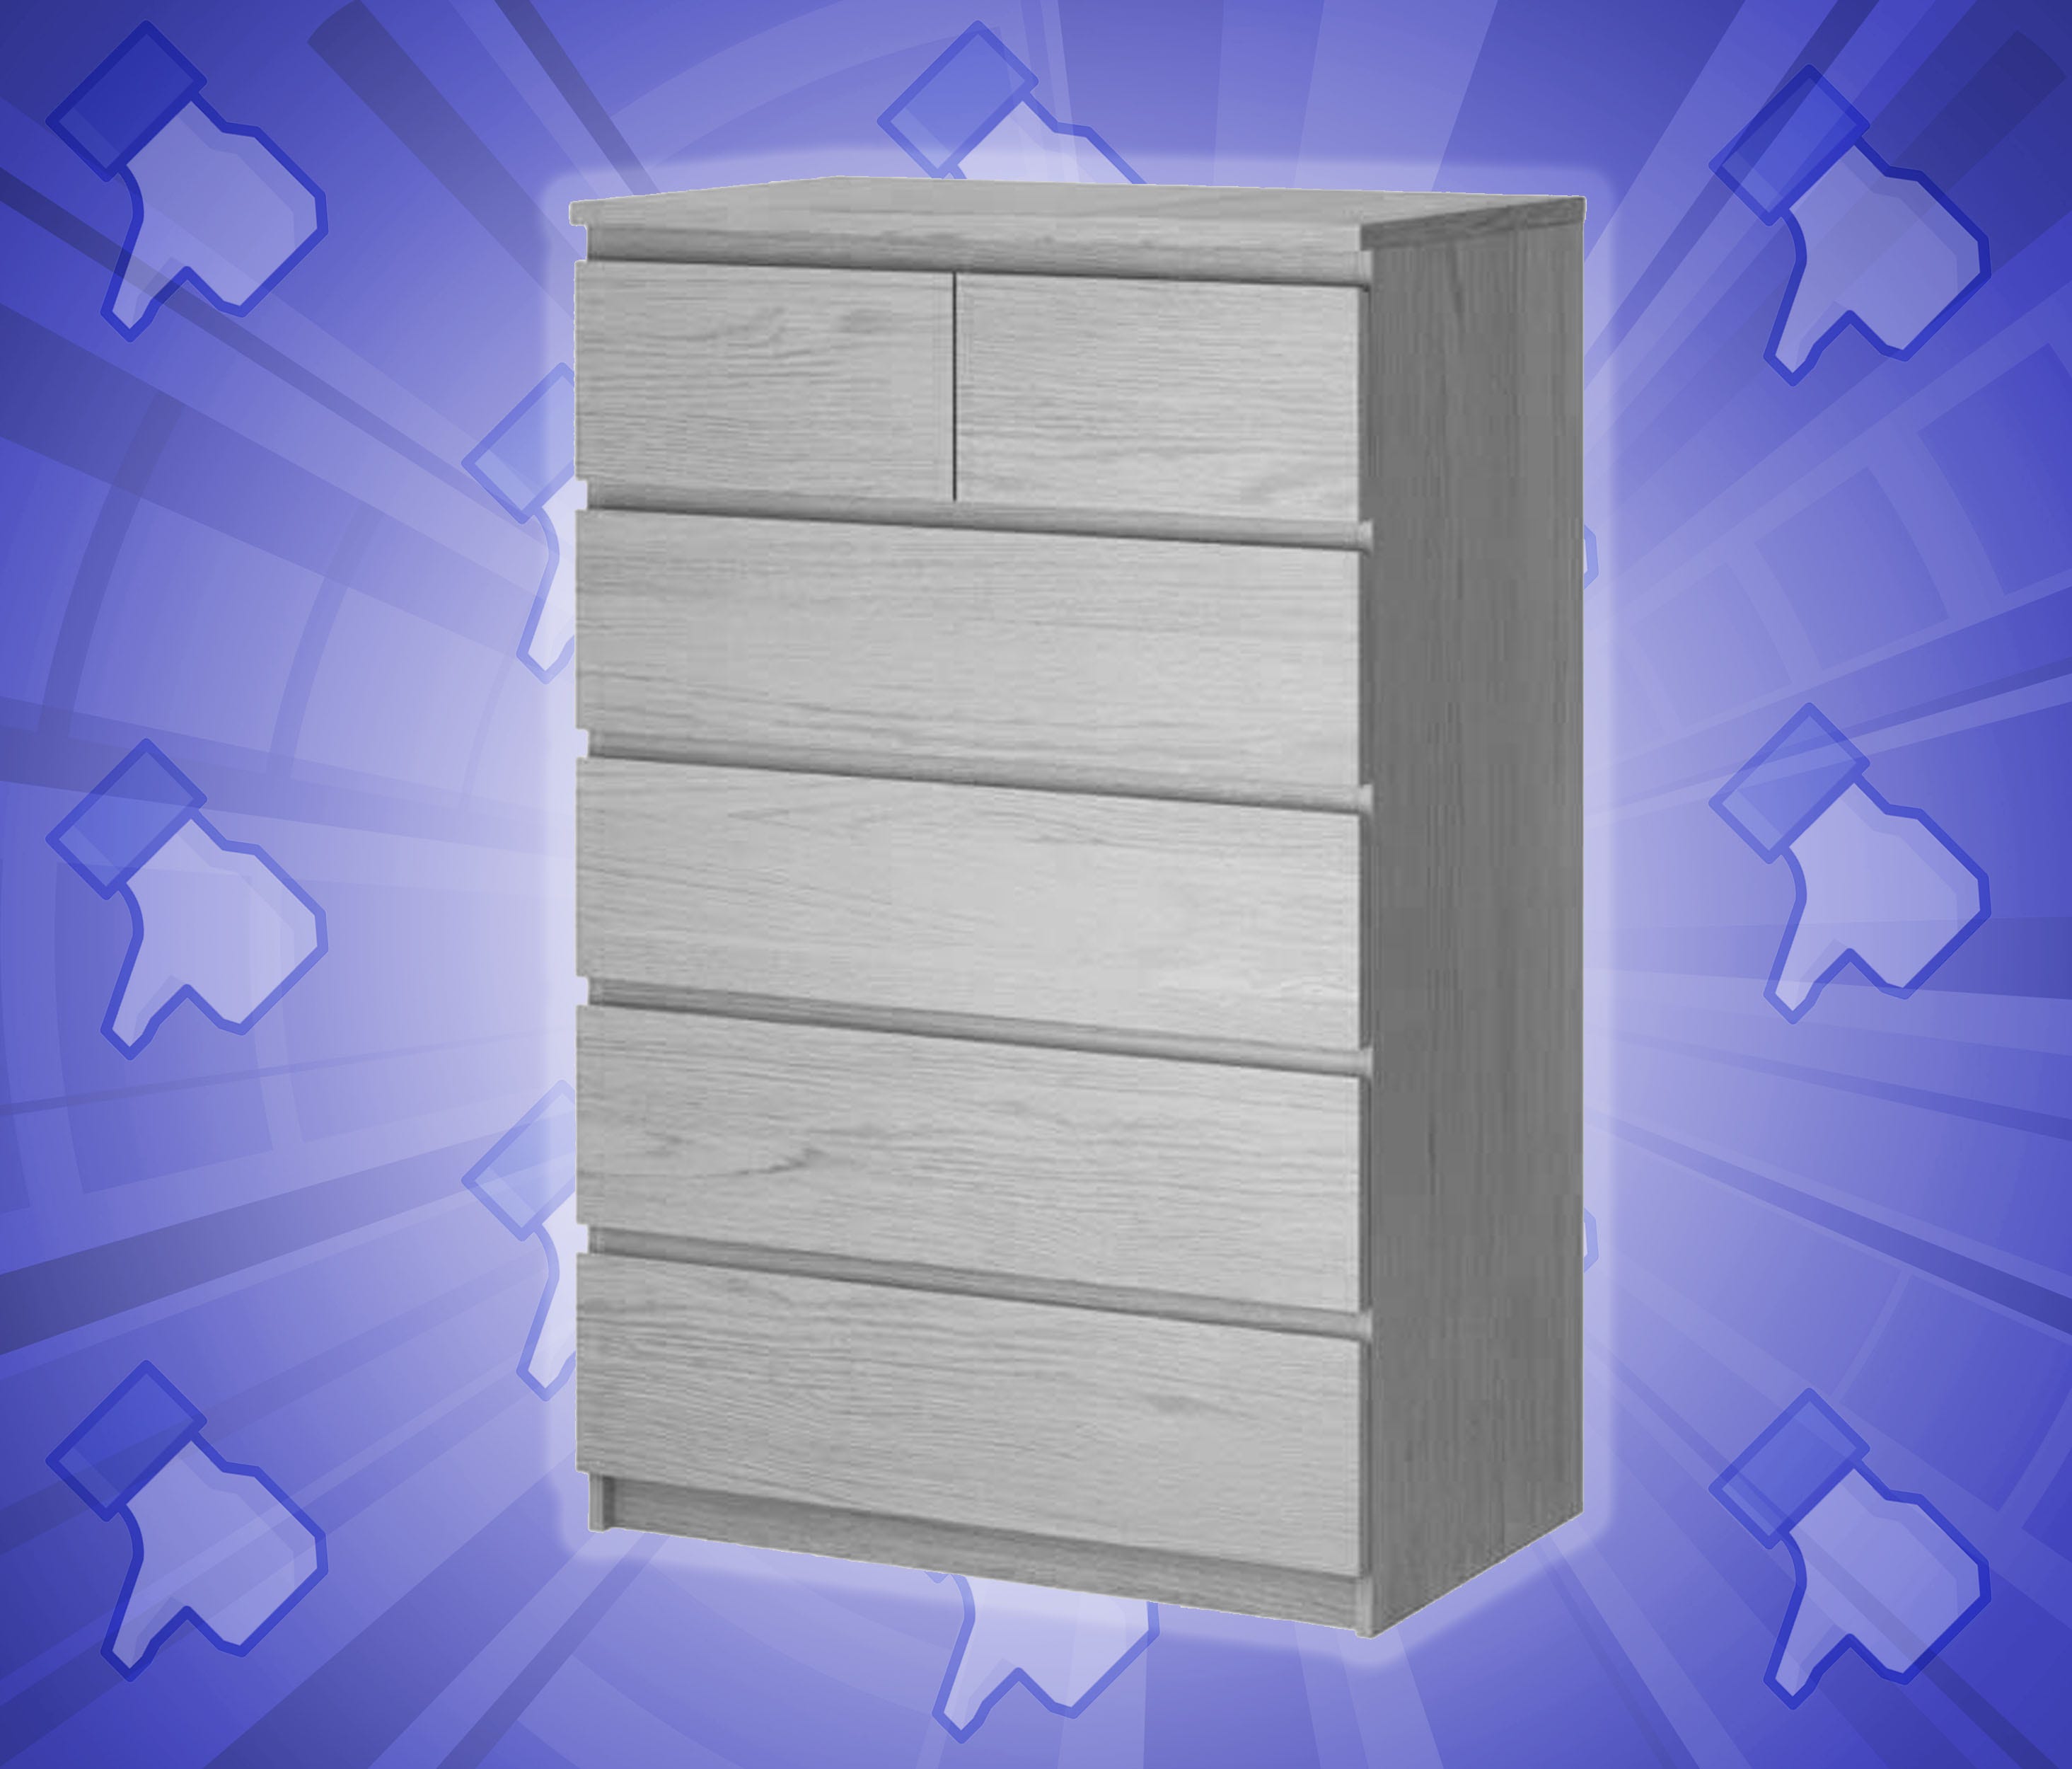 Ikea dressers were recalled in 2016 because they can become unstable if not anchored to the wall. Eight children have died from being crushed by Ikea dressers. Source: USA TODAY illustration